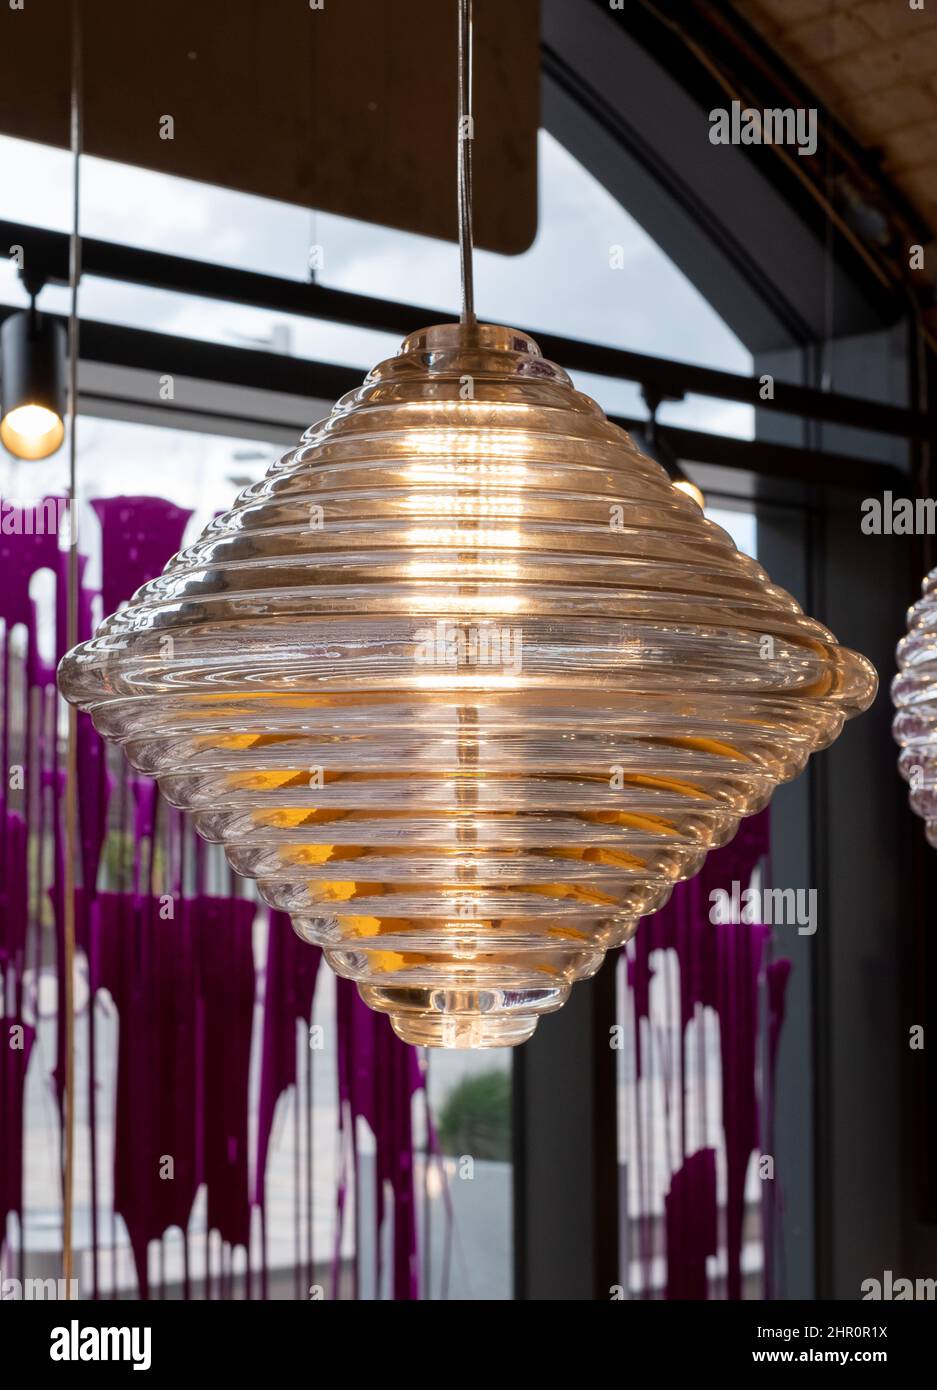 Glass pendant light by the name Press, hanging in the Tom Dixon flagship store and showroom at Coal Drops Yard, Kings Cross, London UK. Stock Photo